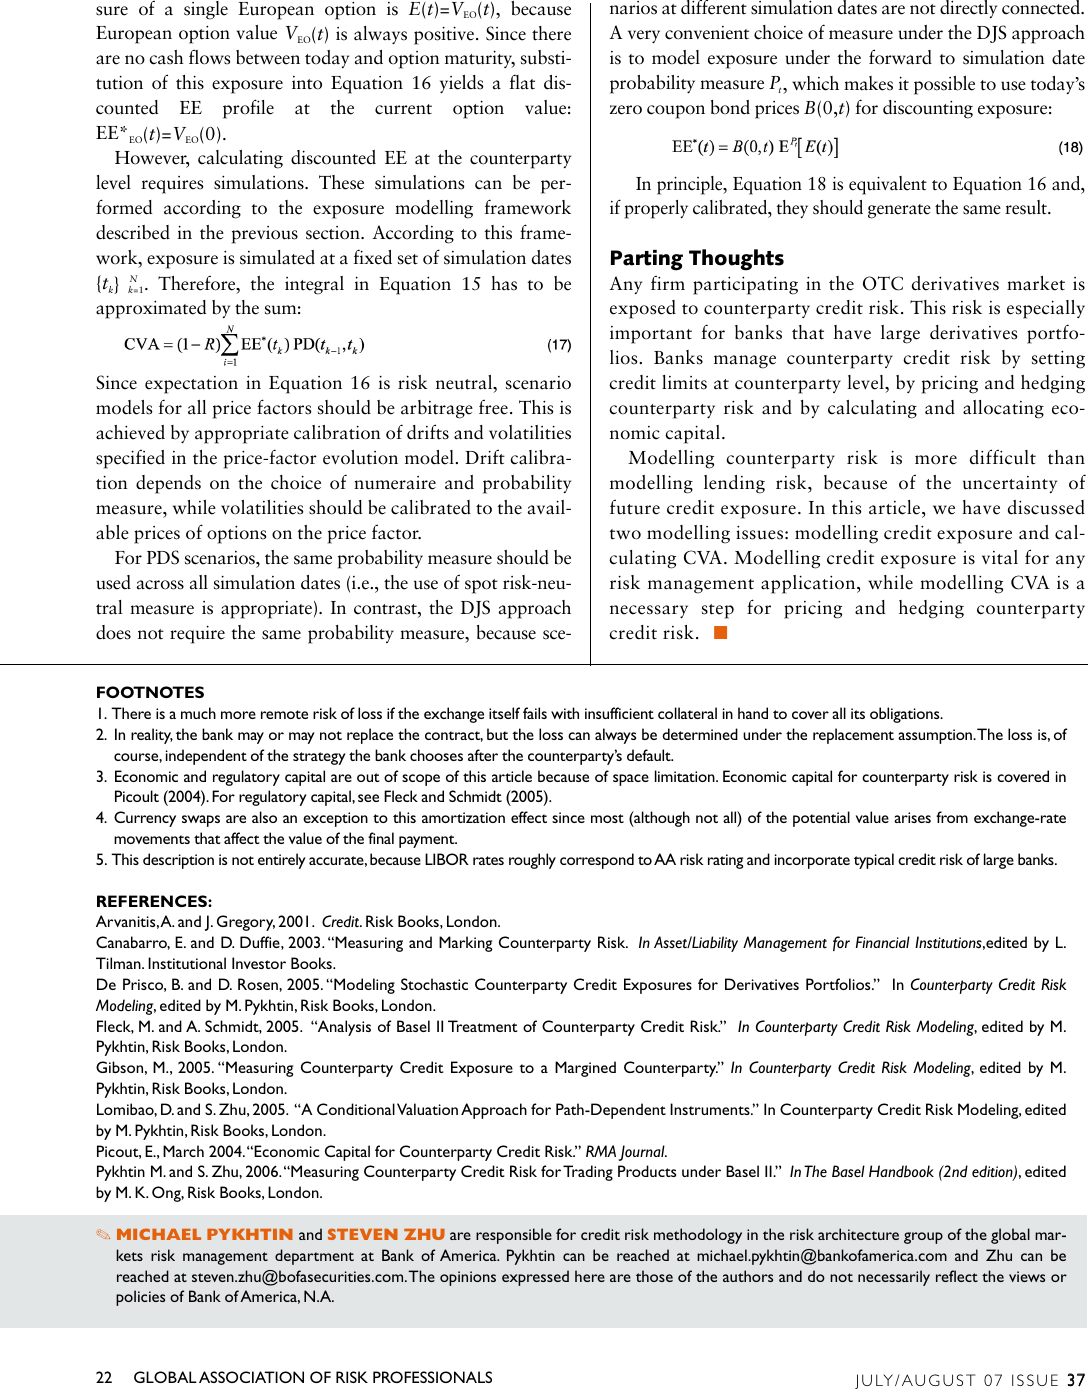 Page 7 of 7 - 16_CoverStory_ Pykhtin, Zhu - 2007 A Guide To Ling Counterparty Credit Risk